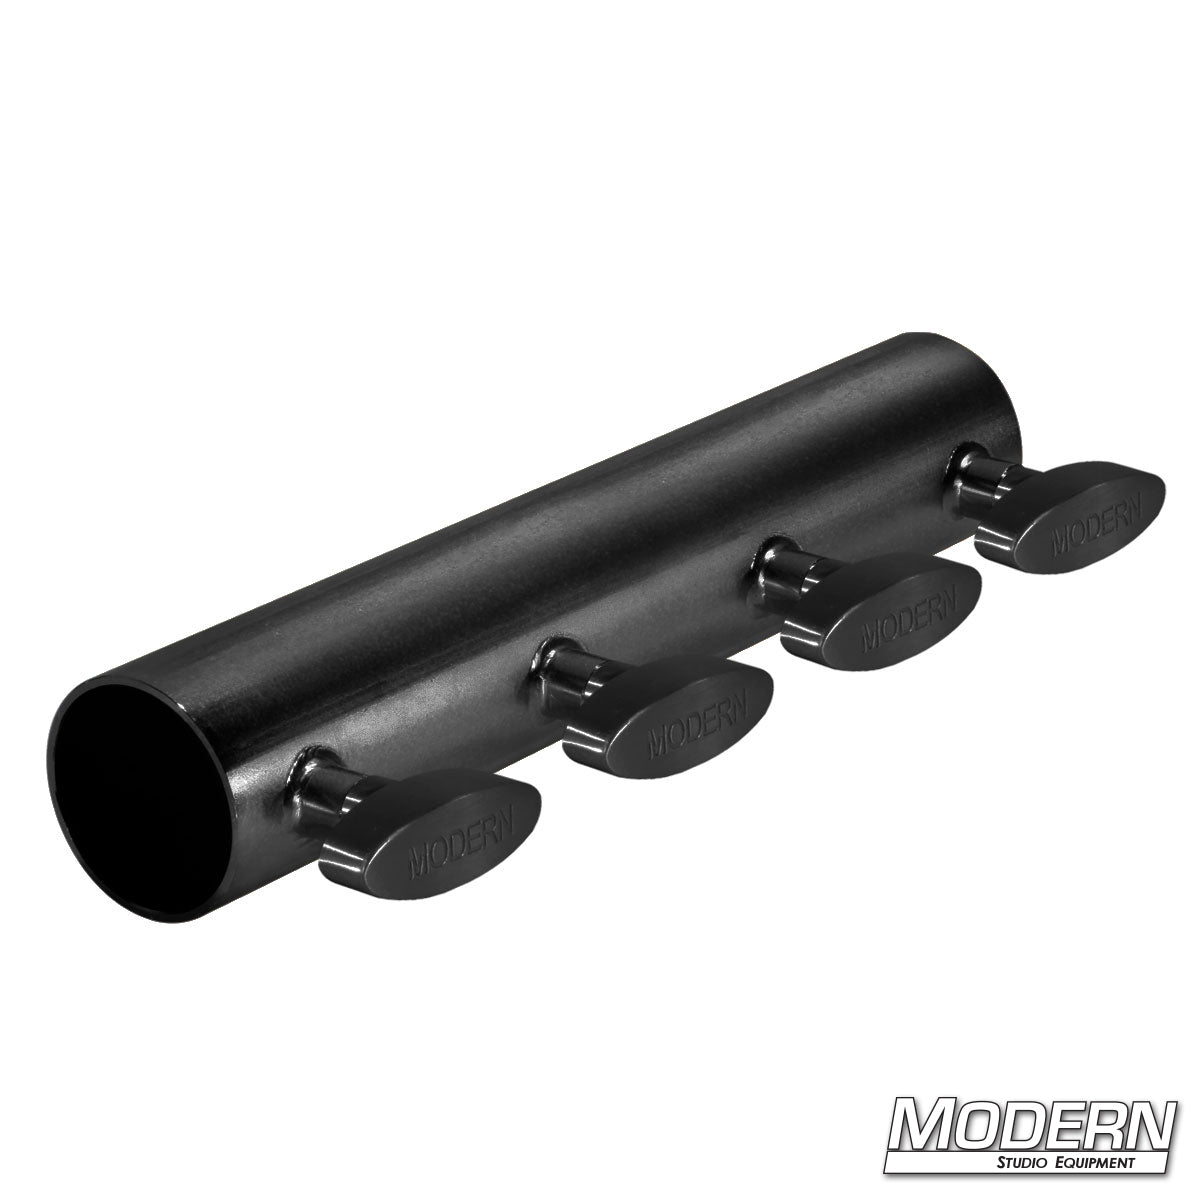 Sleeve for 1-1/2" Speed-Rail®